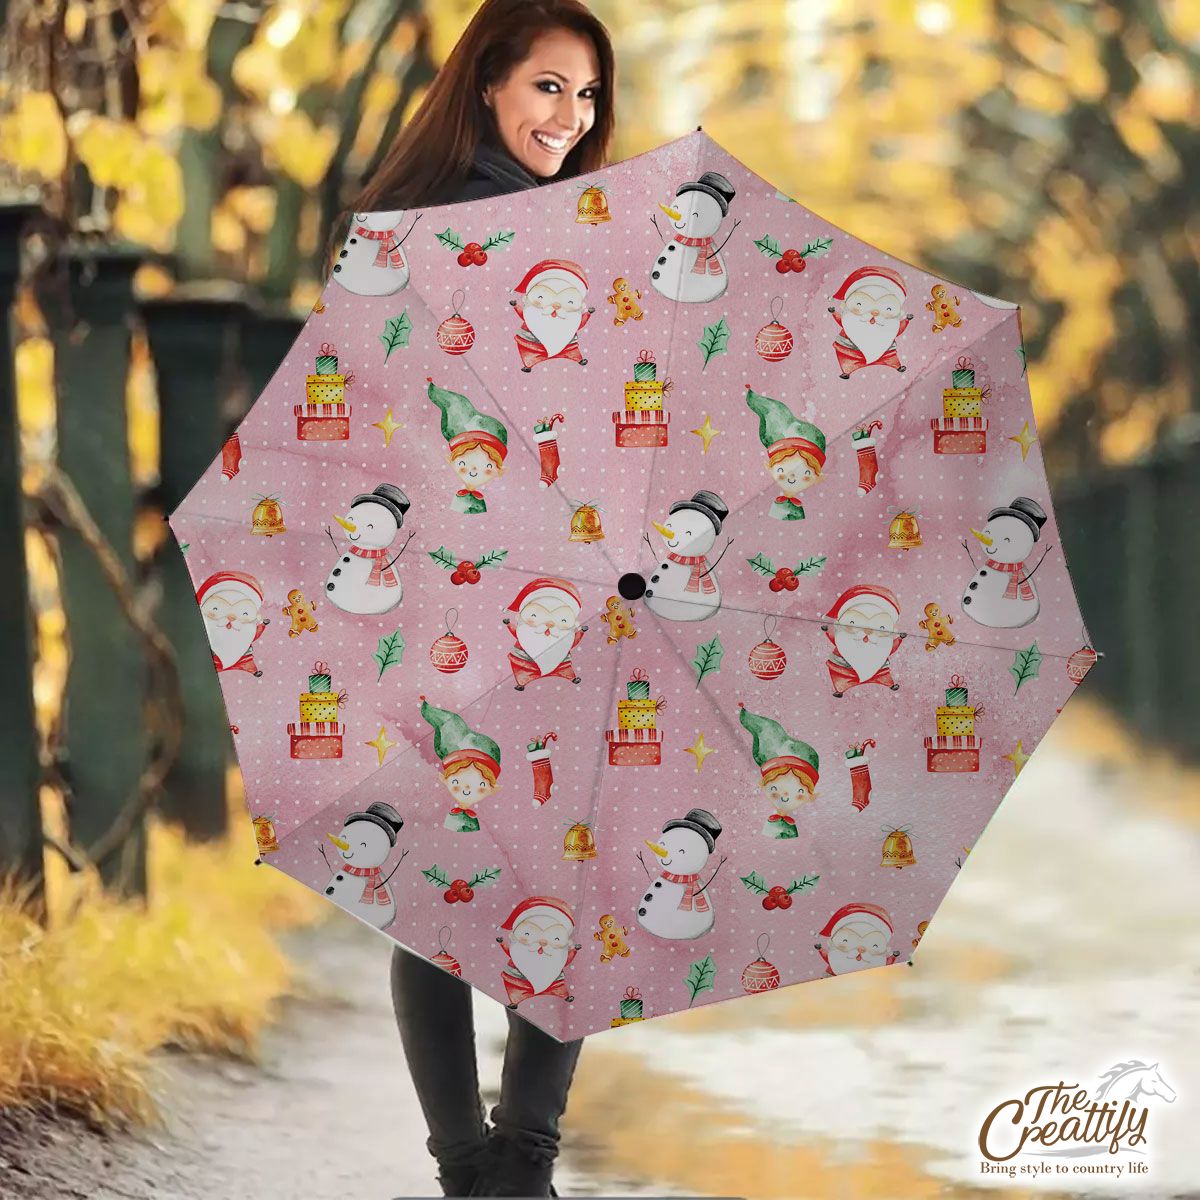 Santa Clause, Snowman And Christmas Elf With Christmas Gifts Umbrella